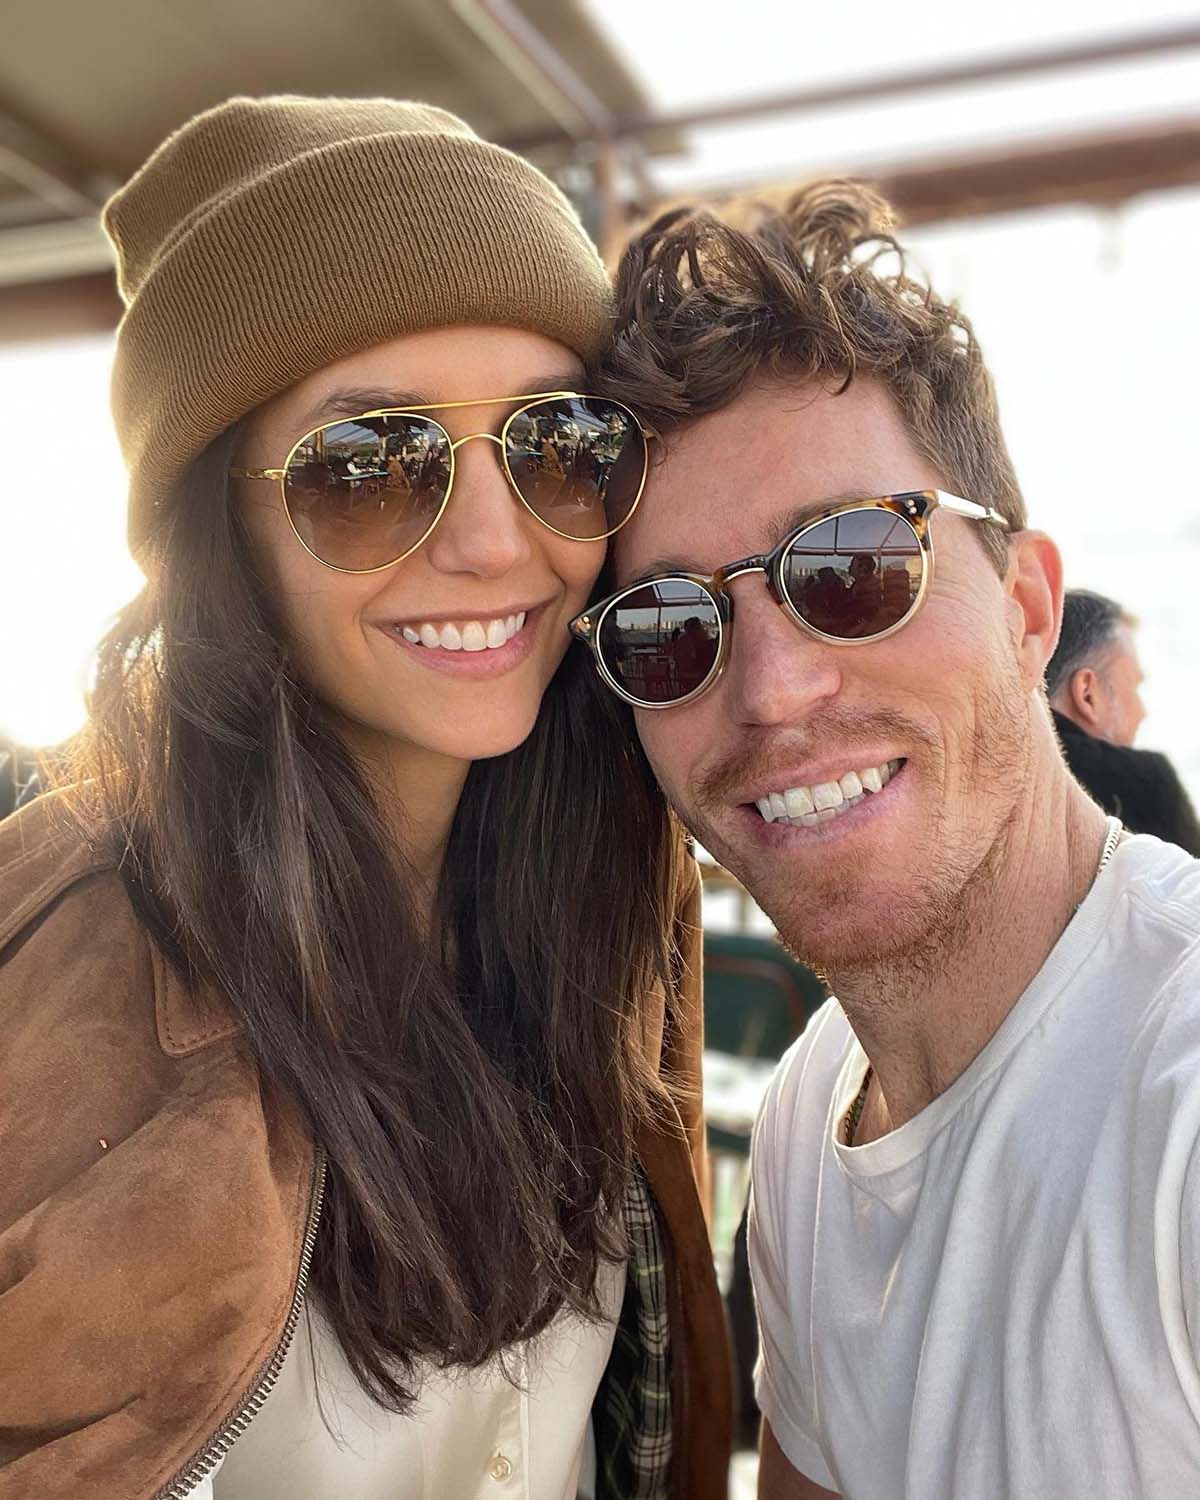 Who is Shaun White dating 2021? –  – #1 Official Stars